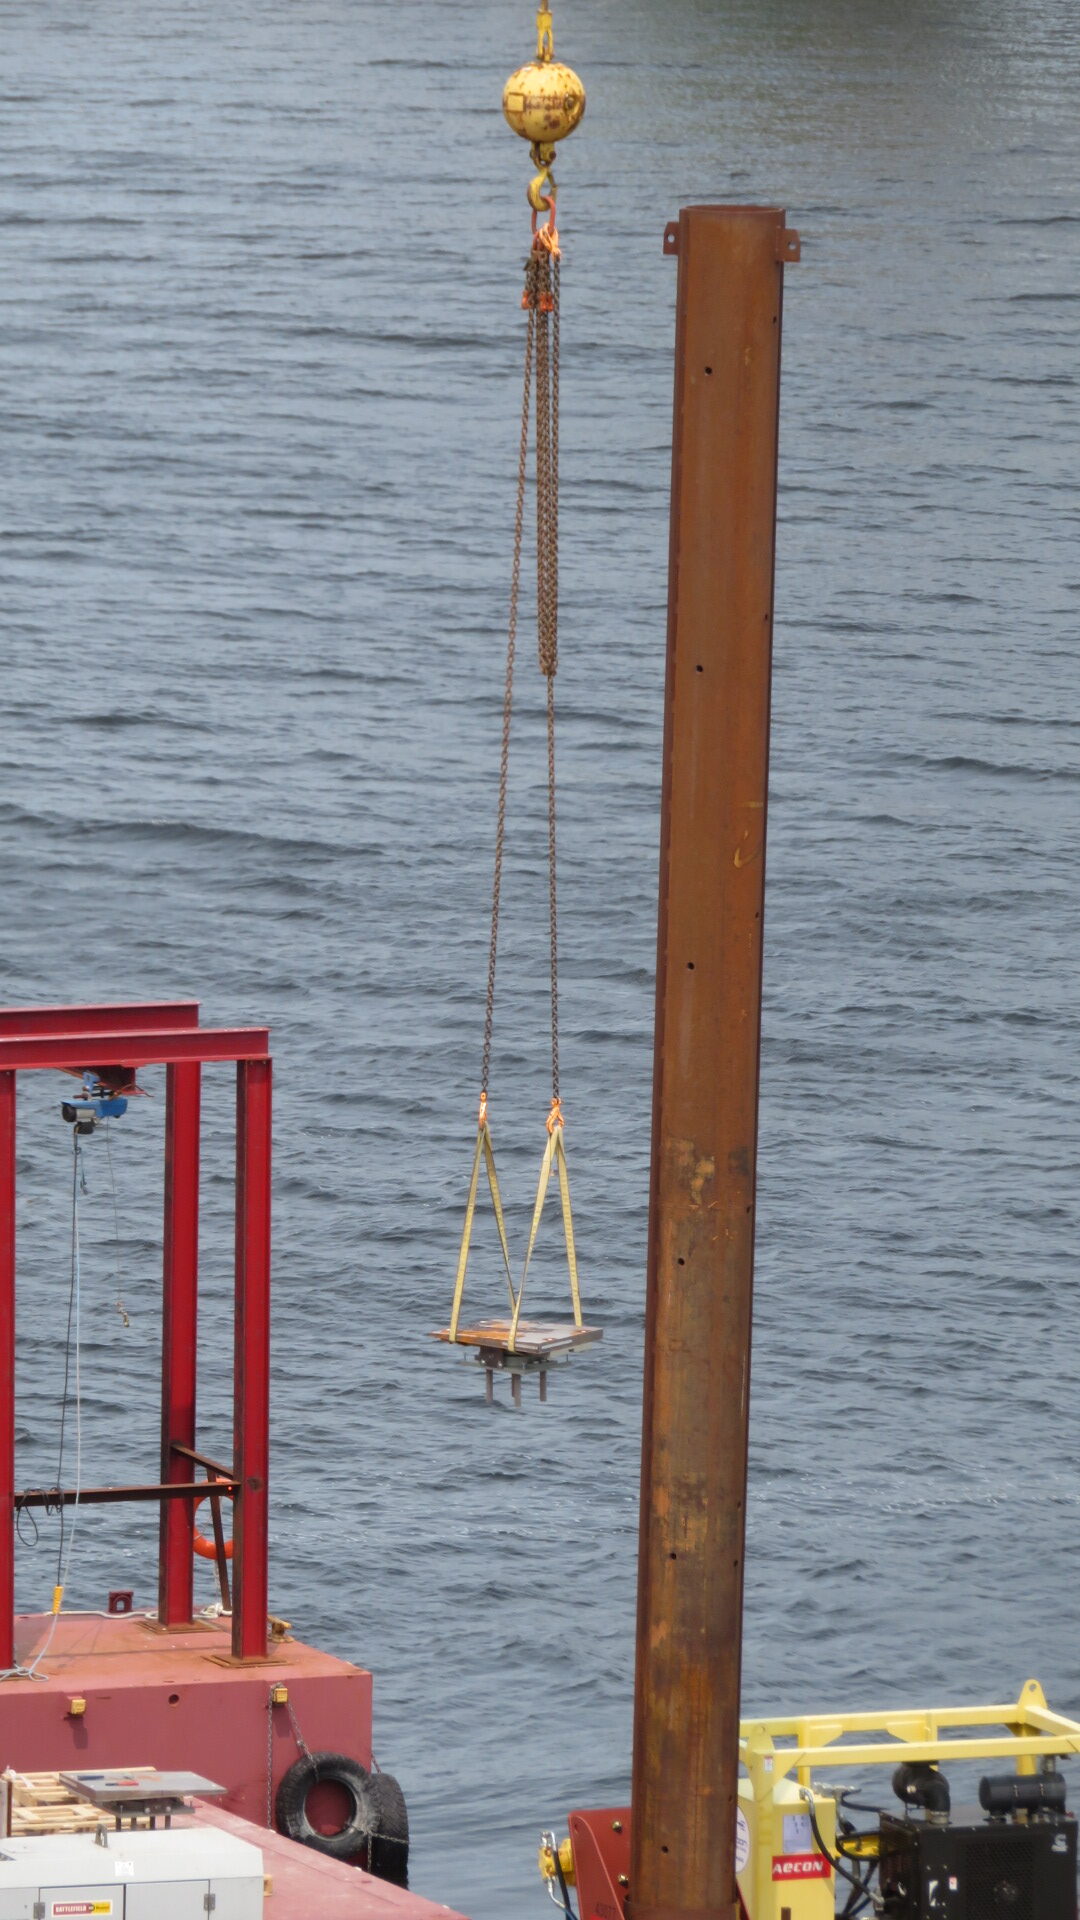 200-ton crane lifting the bearing from the barge